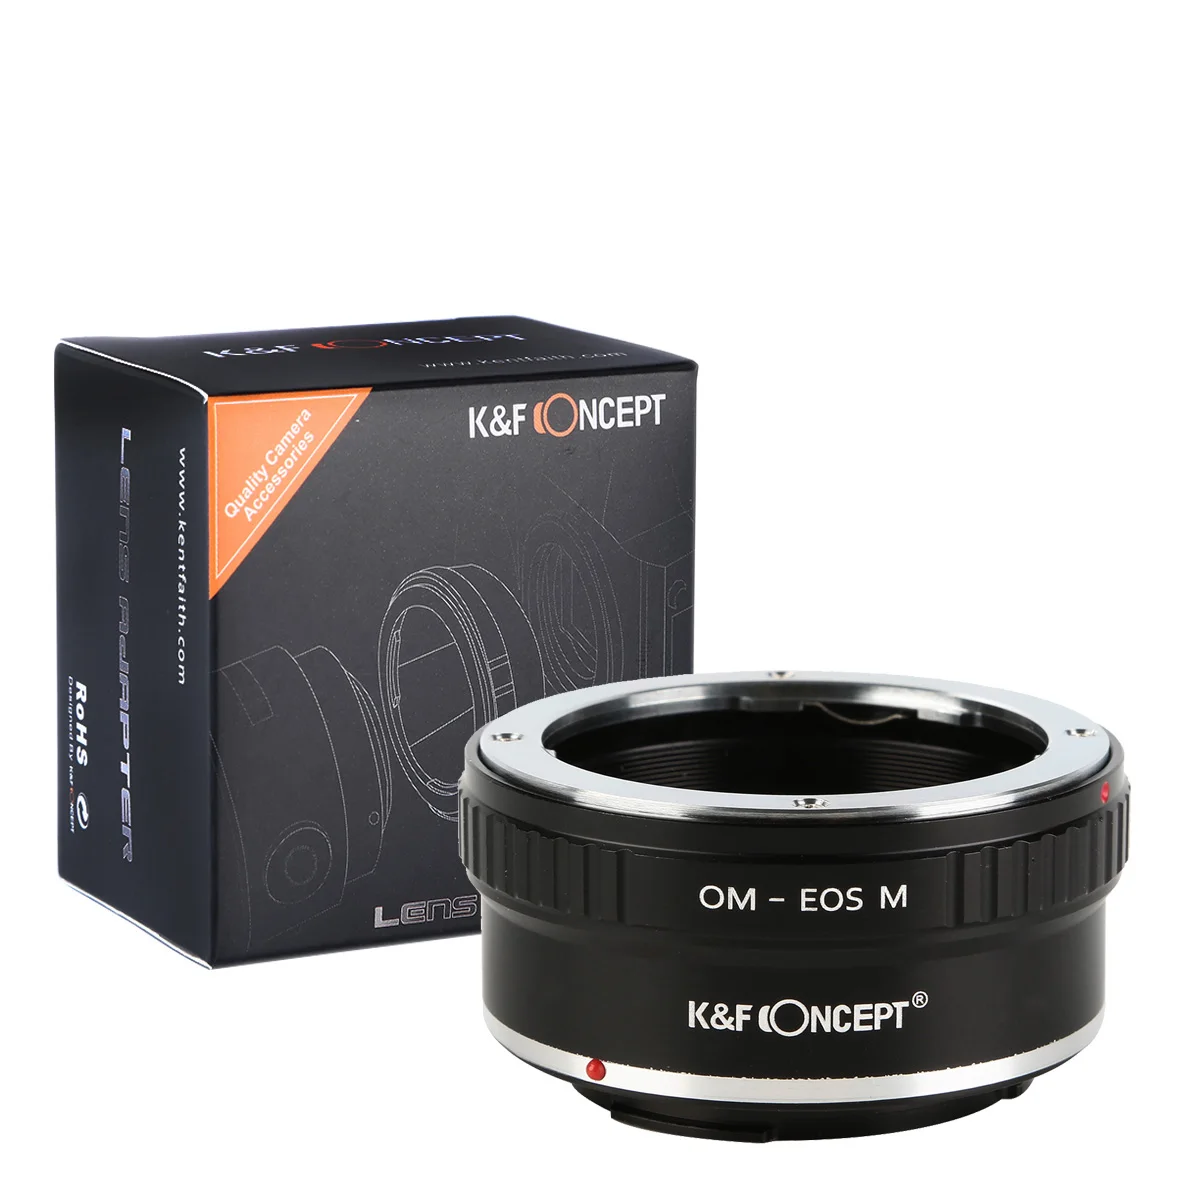 

K&F Concept Lens Adapter for Olympus OM mount lens to Canon EOS M camera M1 M2 M3 M5 M6 M50 M100